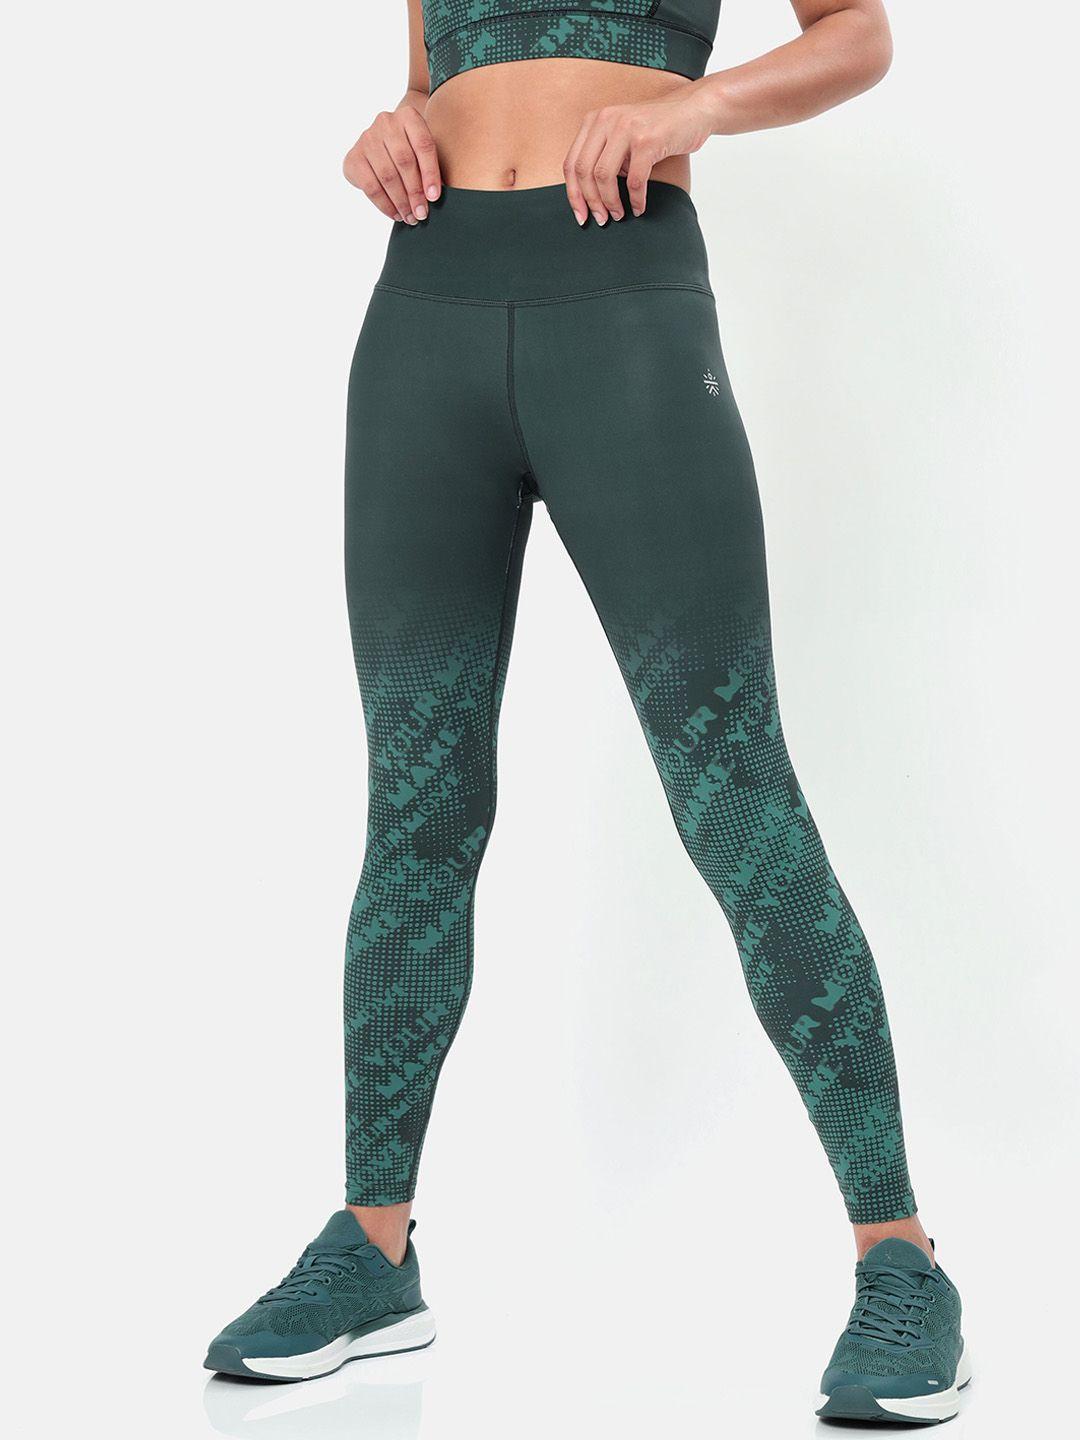 cultsport women green printed absolute fit sports tights